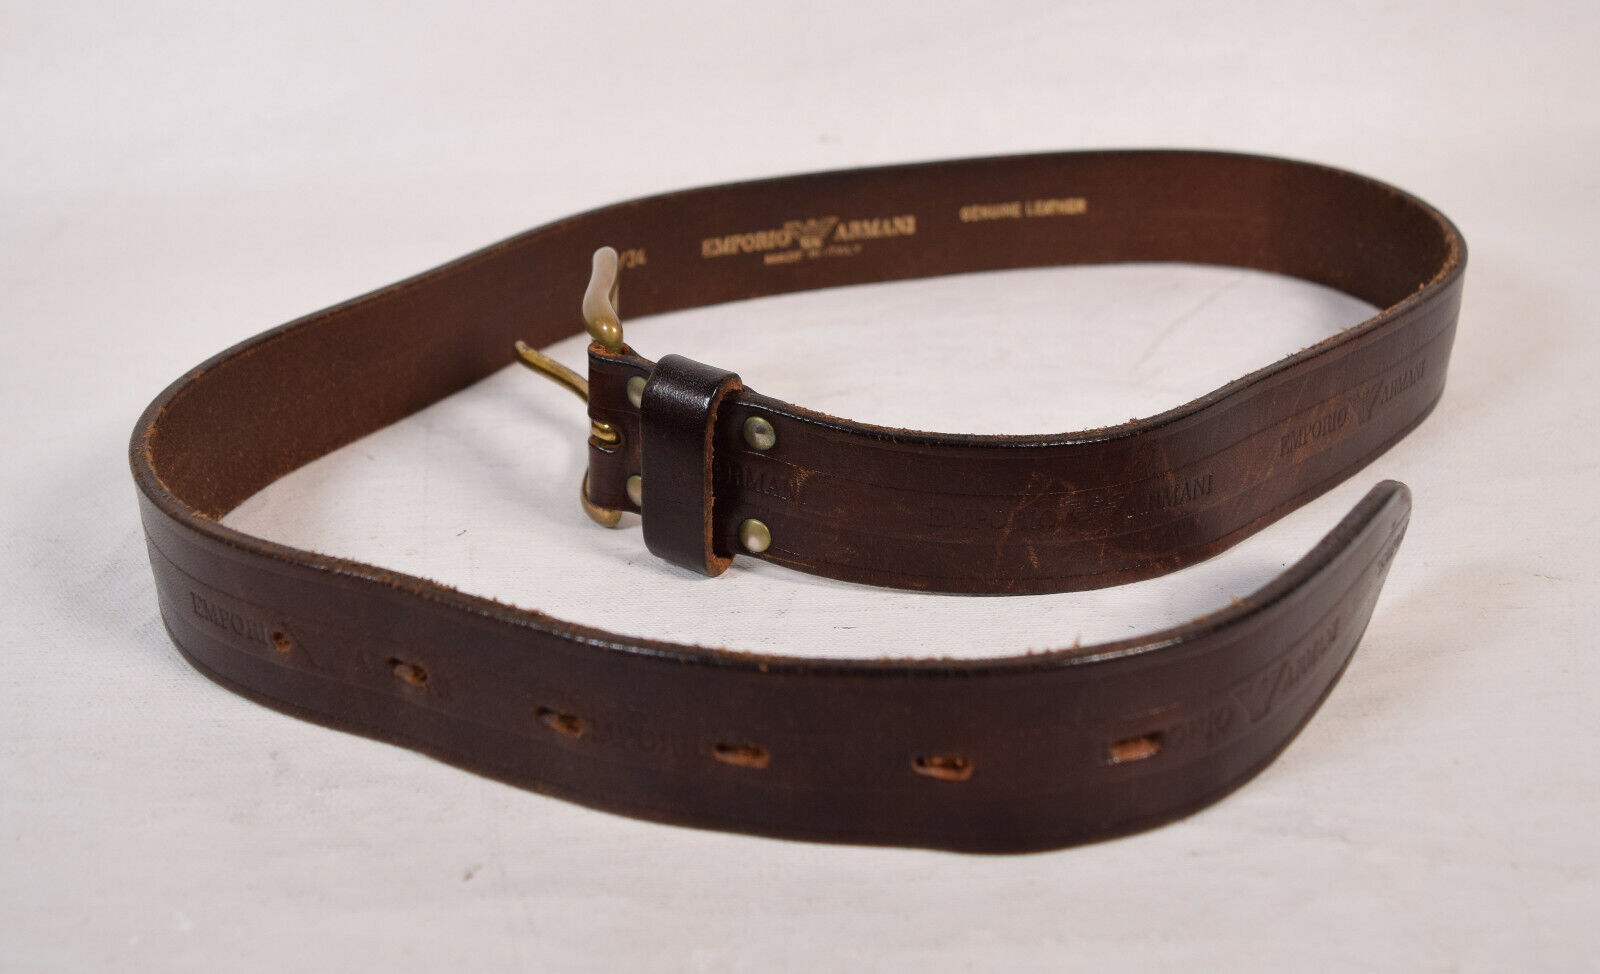 Emporio Armani Mens Leahter Belt Brown 85 34 Italy - $79.20